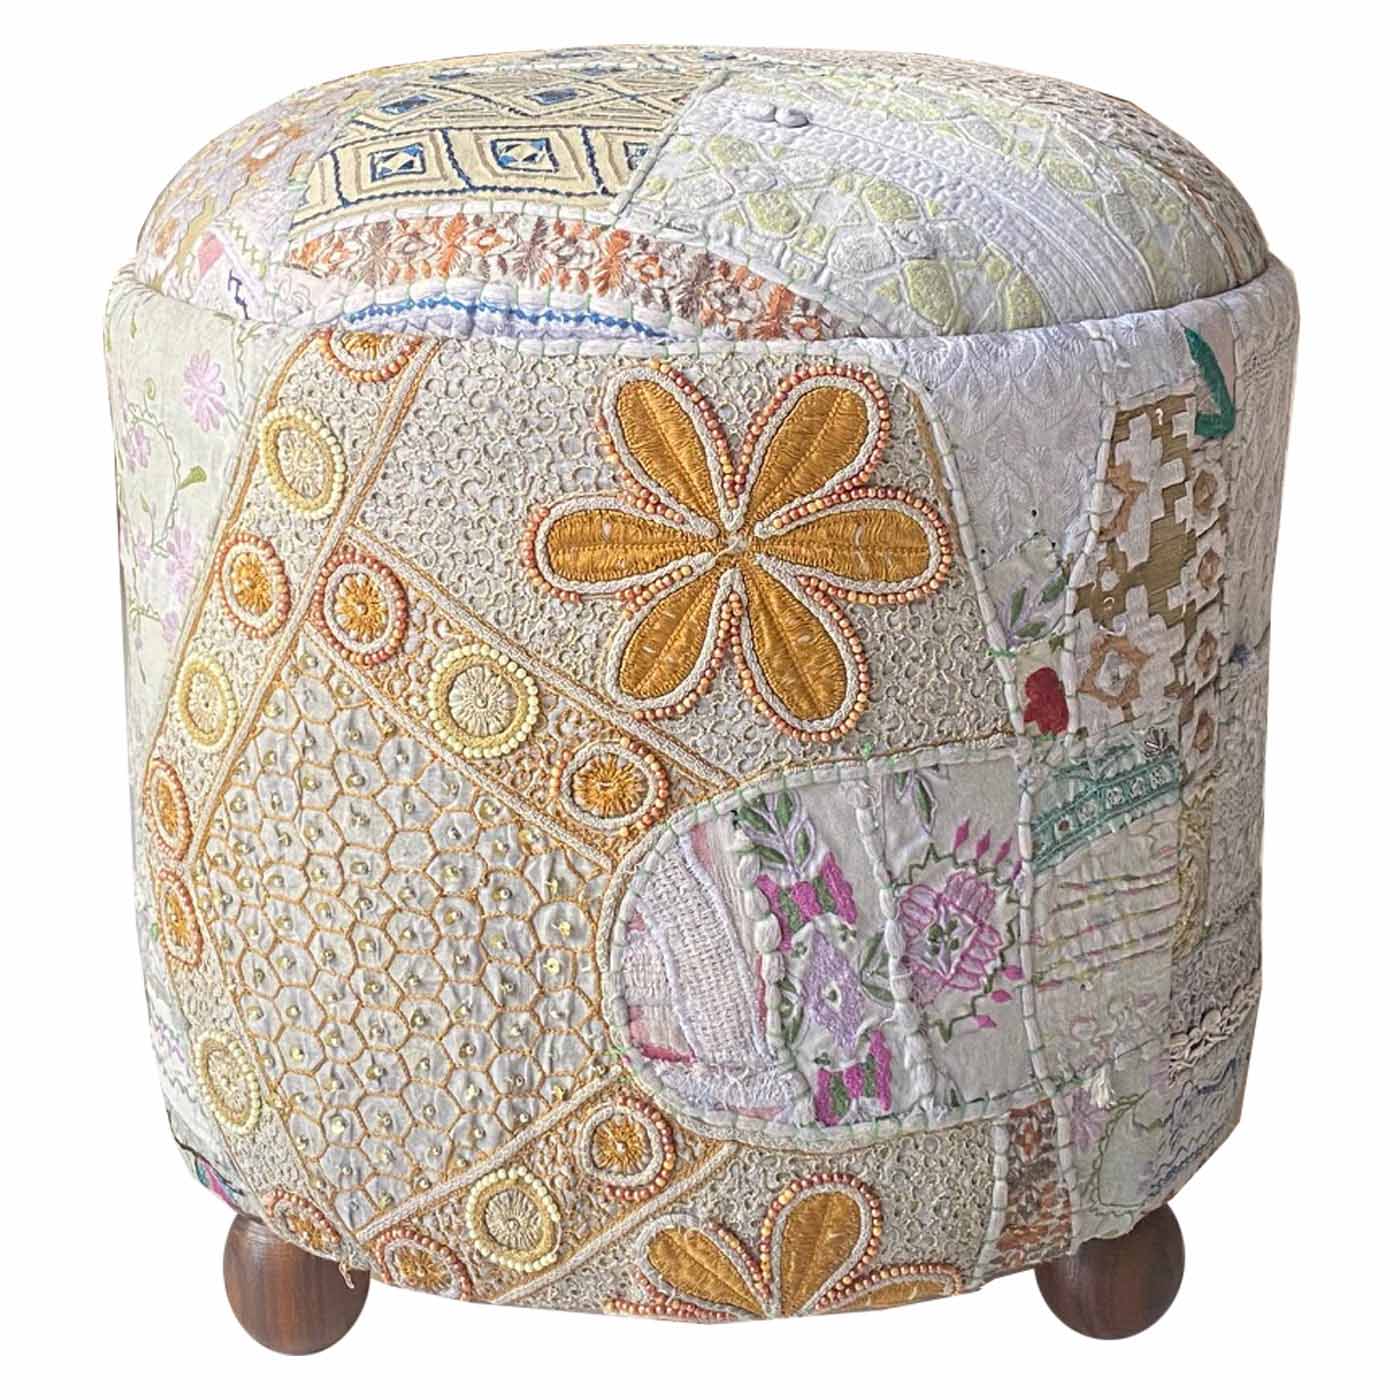 Patchwork Pouf in Lilac